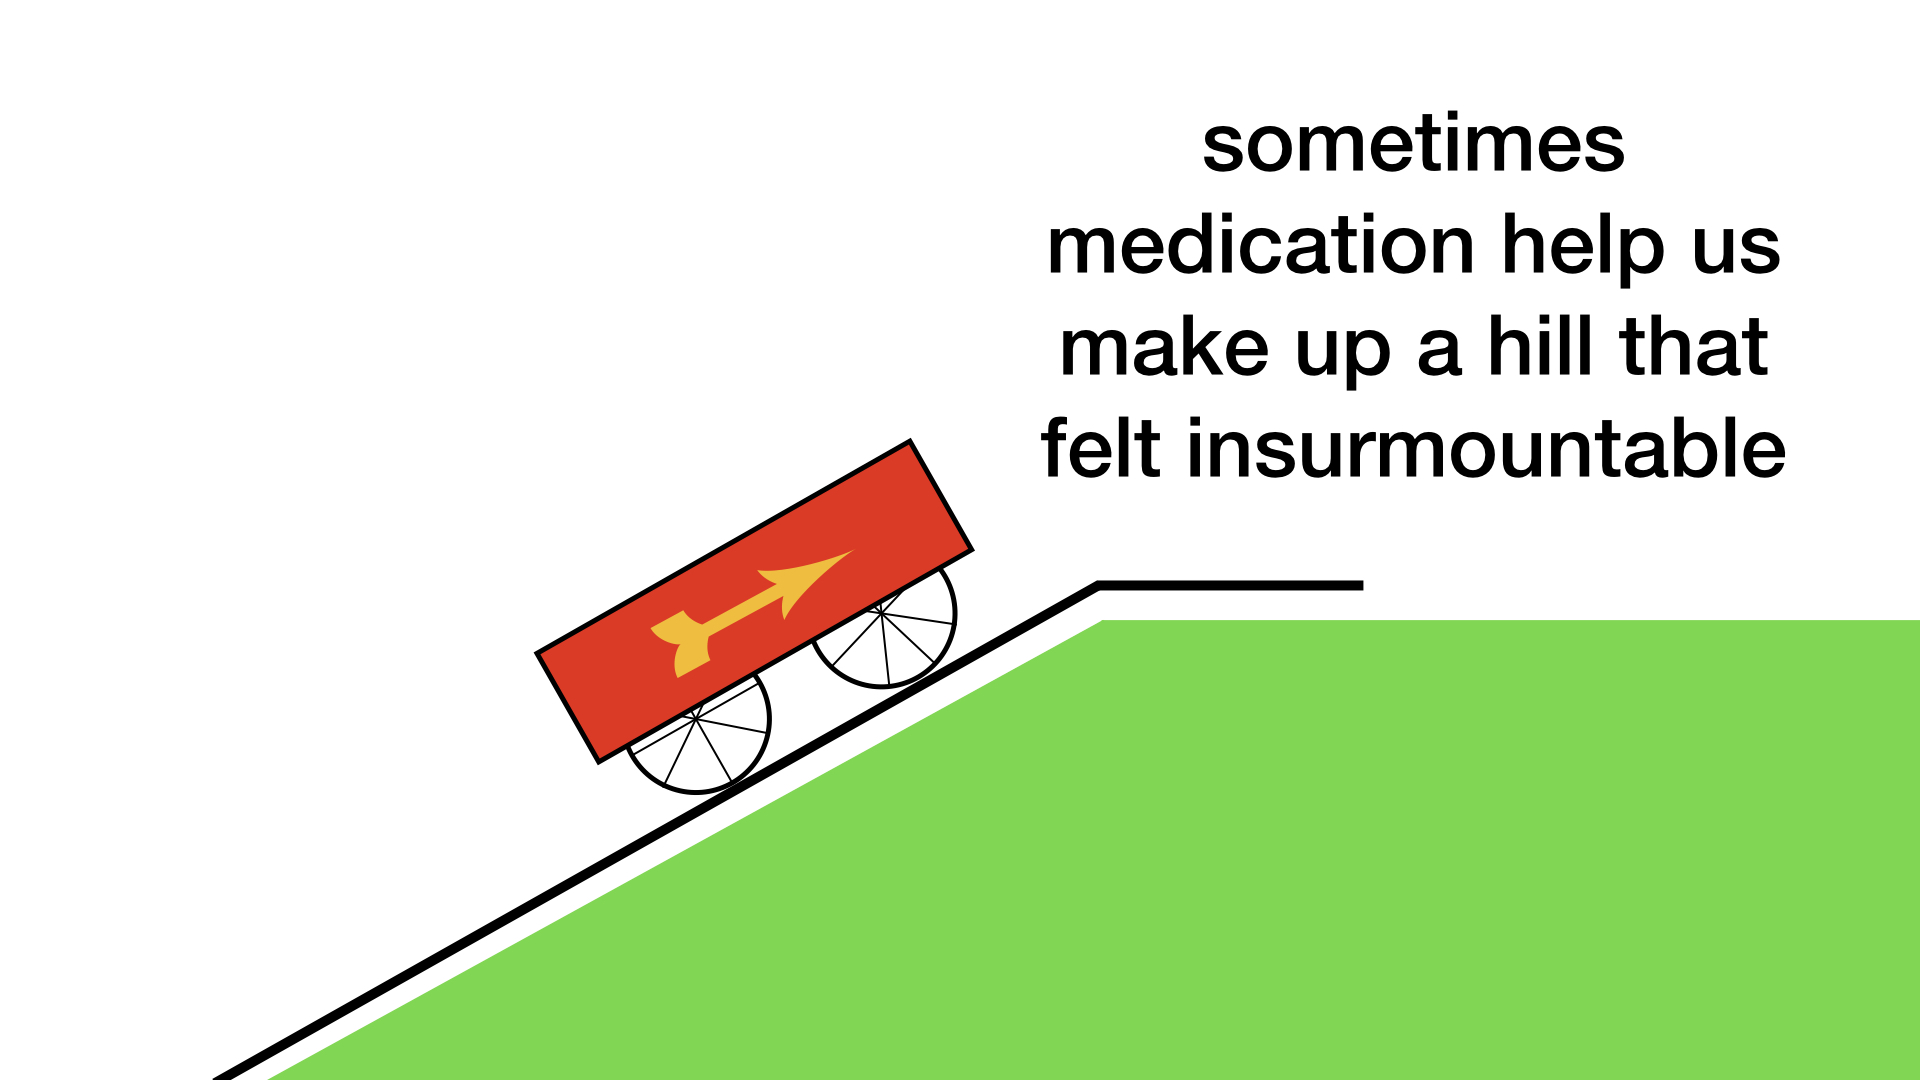 Graphic I created showing a cart going up a hill